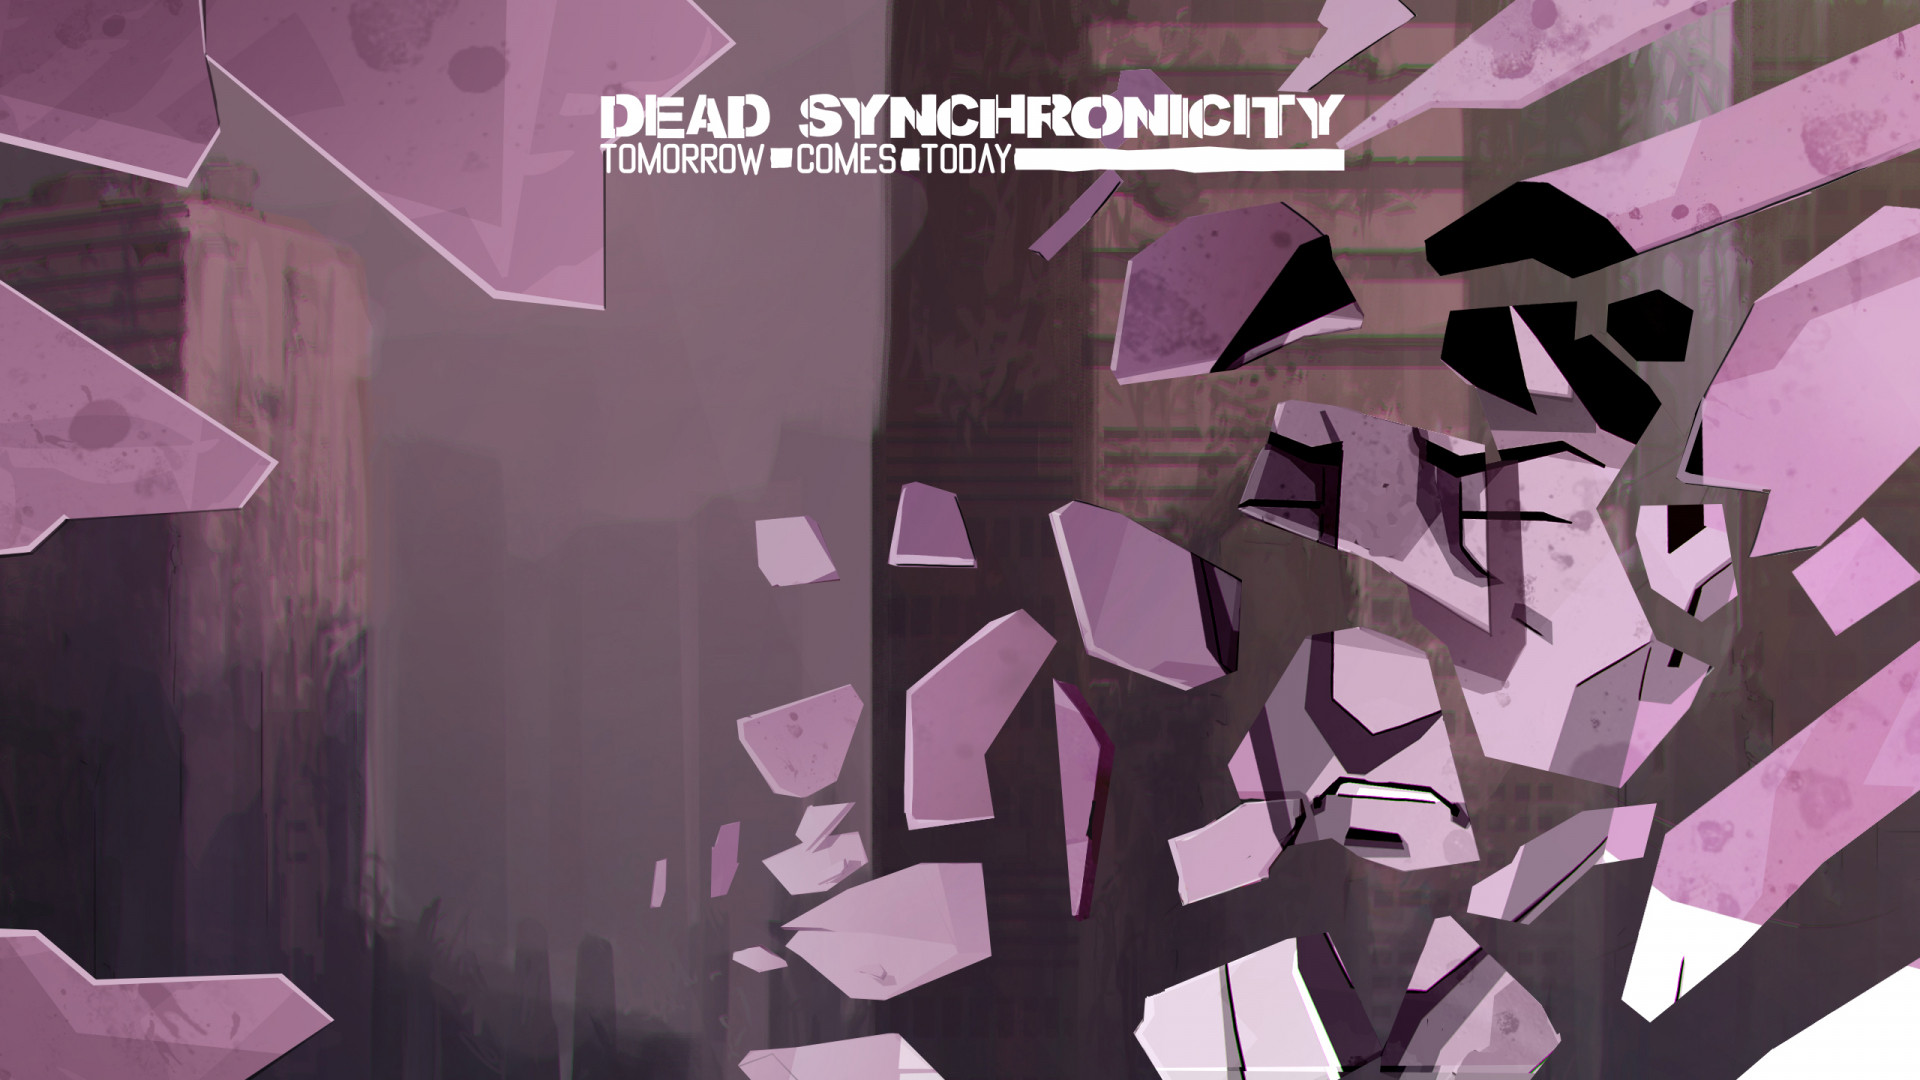 Tomorrow come late. Dead Synchronicity tomorrow comes today ps4.